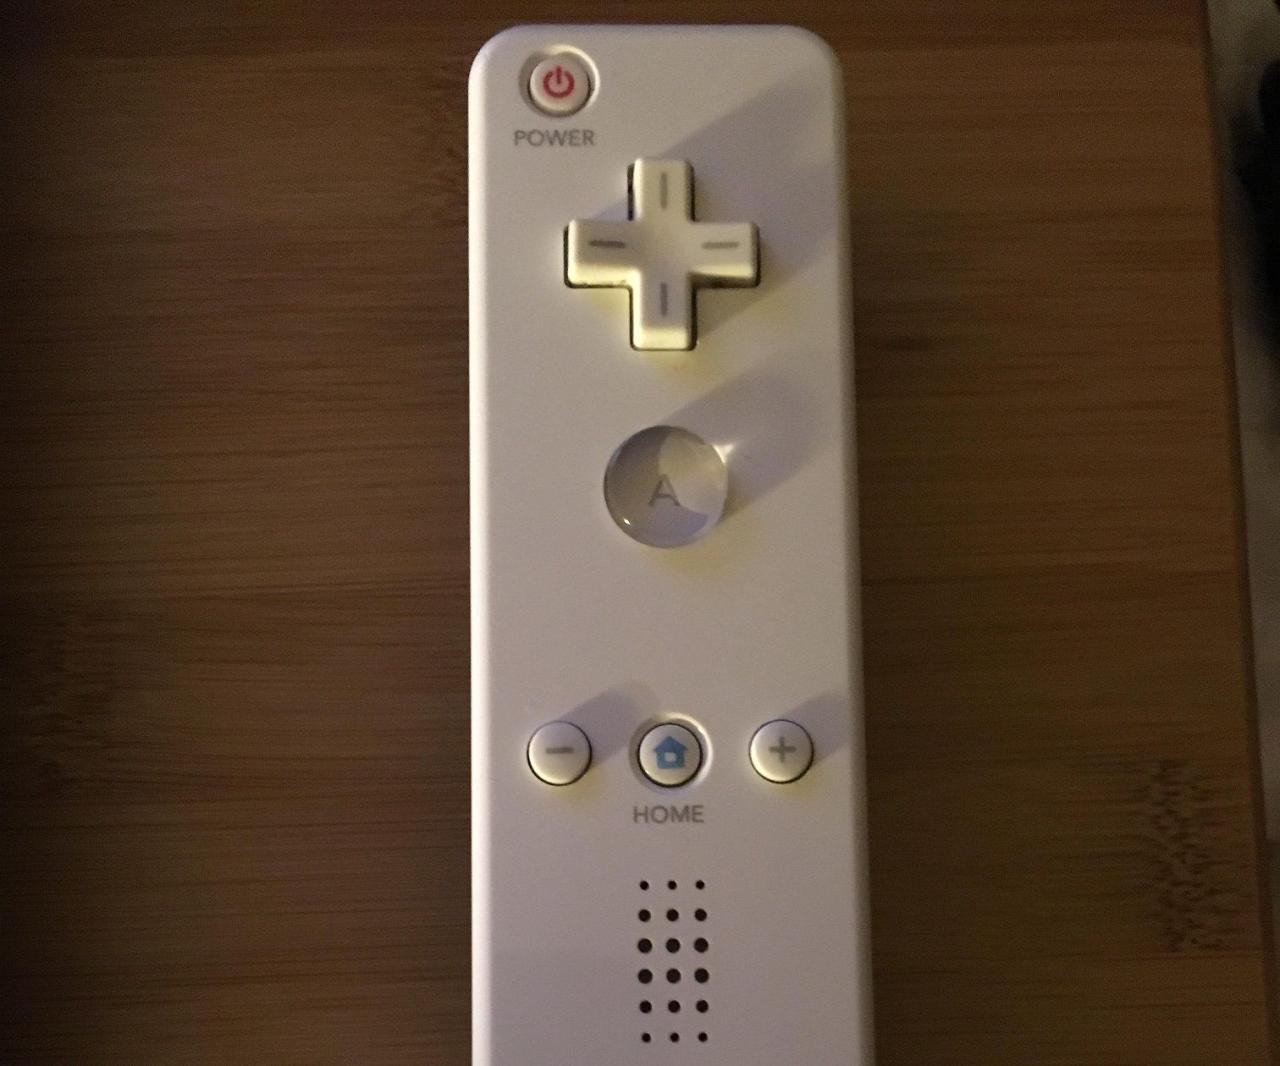 How sync wii remote